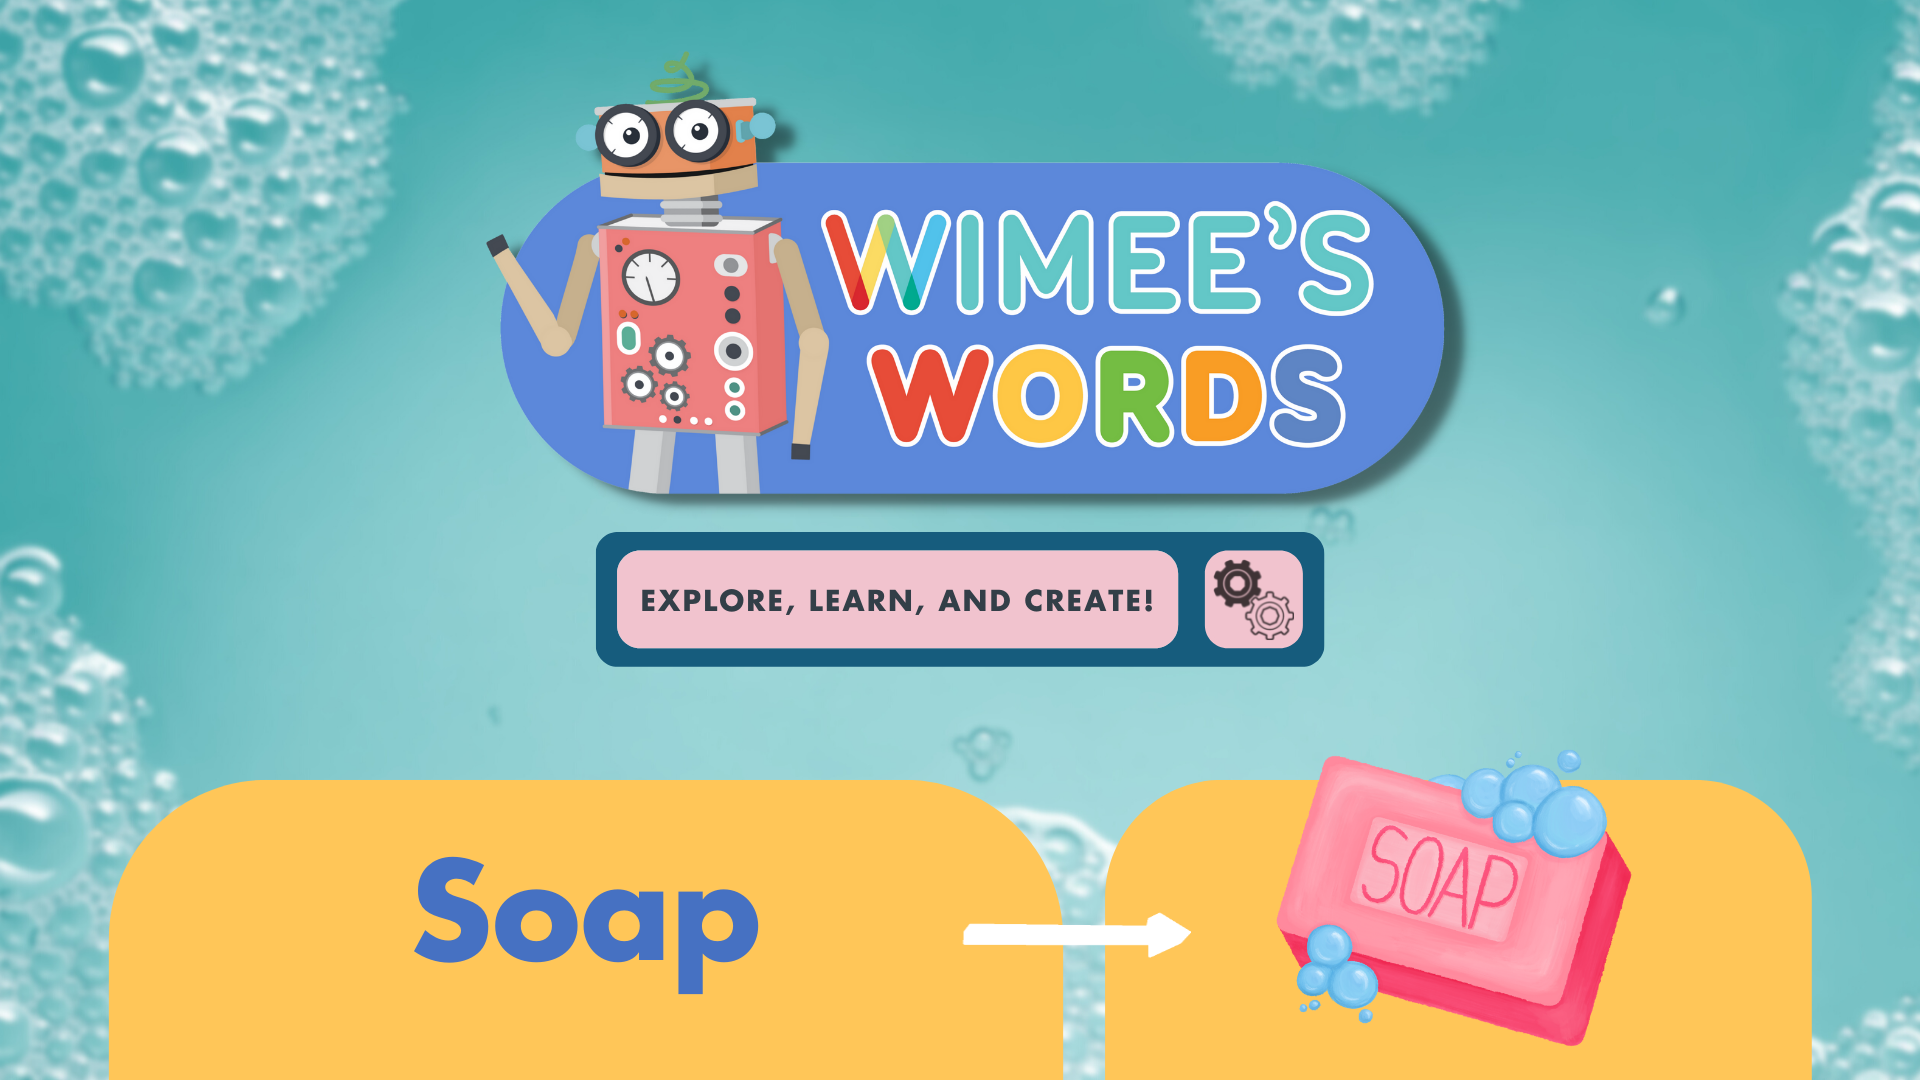 An image of soap bubbles sitting on blue water. The WImee's WOrds logo, the title "Soap," and a graphic of a bar of soap are on the image.